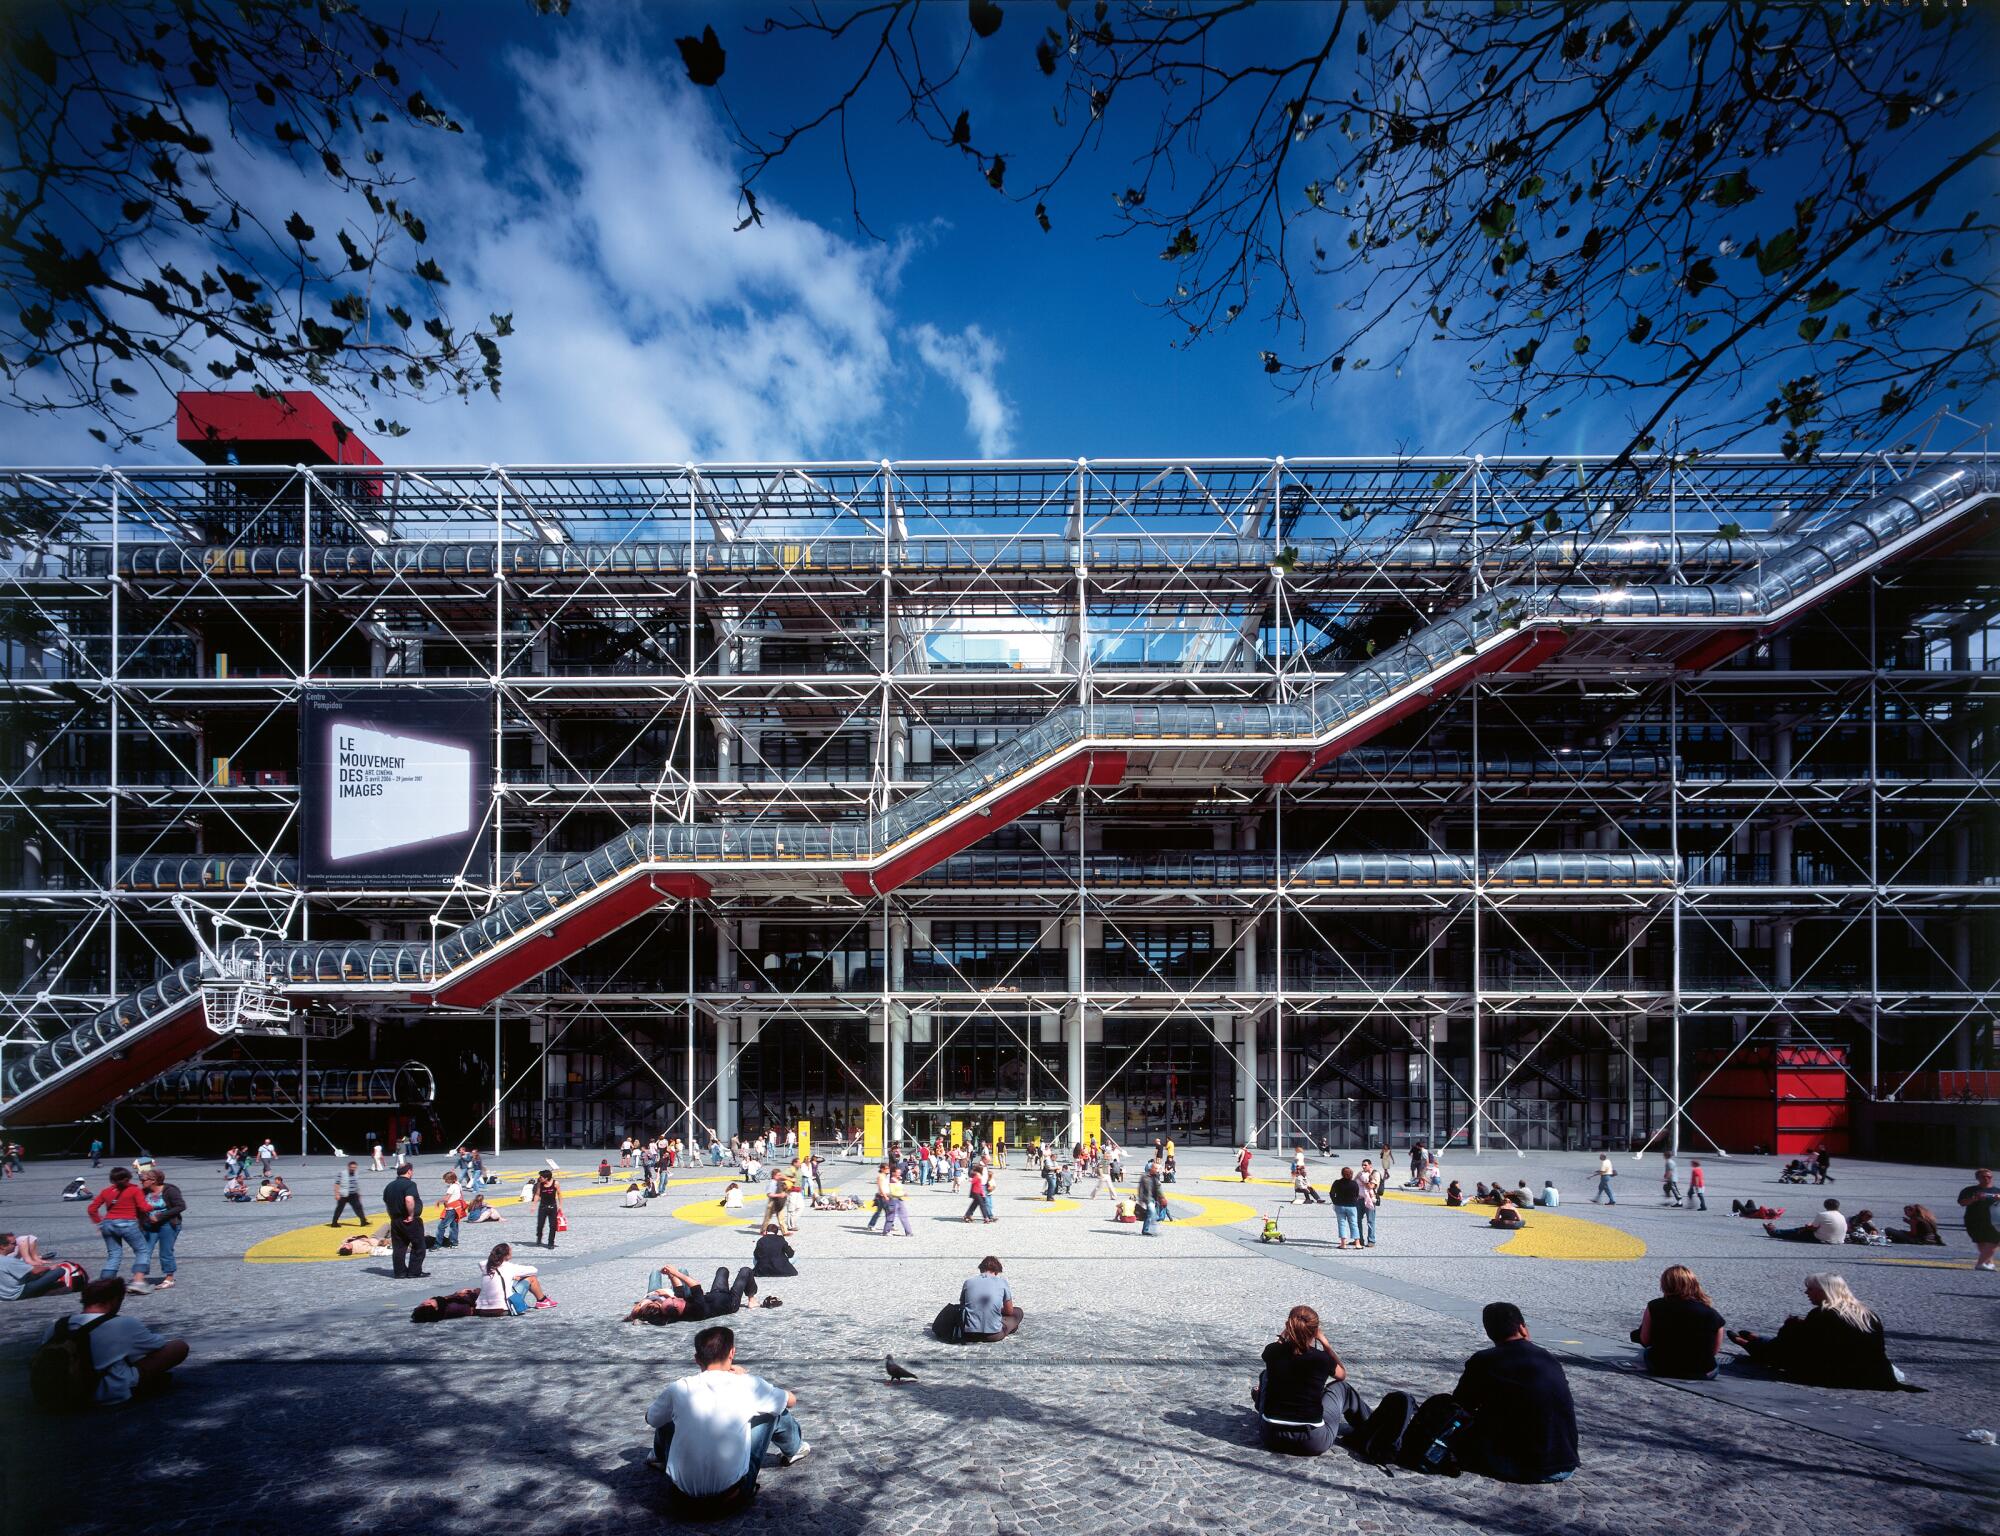 A tube-like structure containing escalators ascends across the facade of the Centre Pompidou